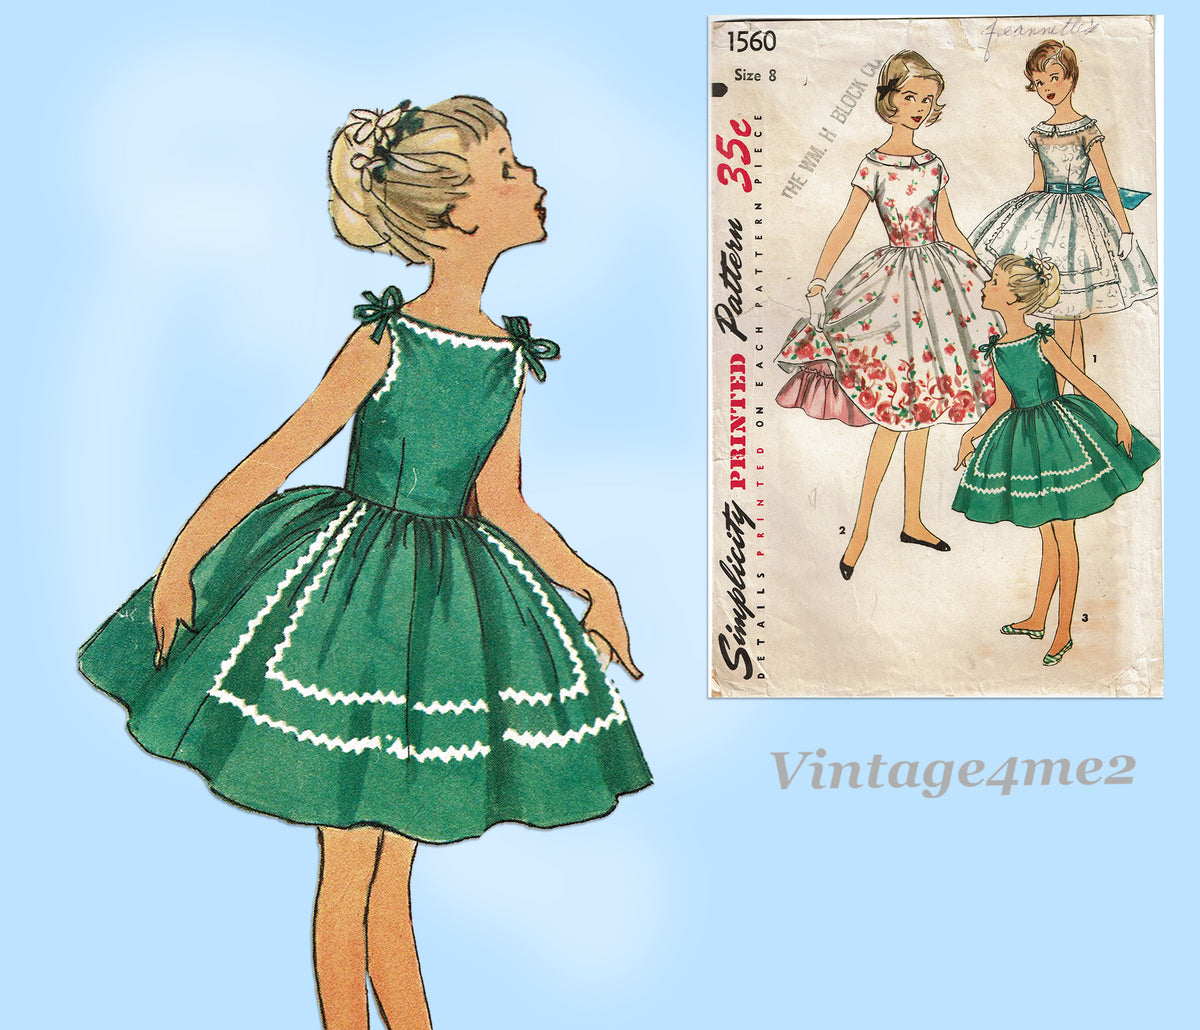 Why do so many vintage sewing patterns have a seam down the middle